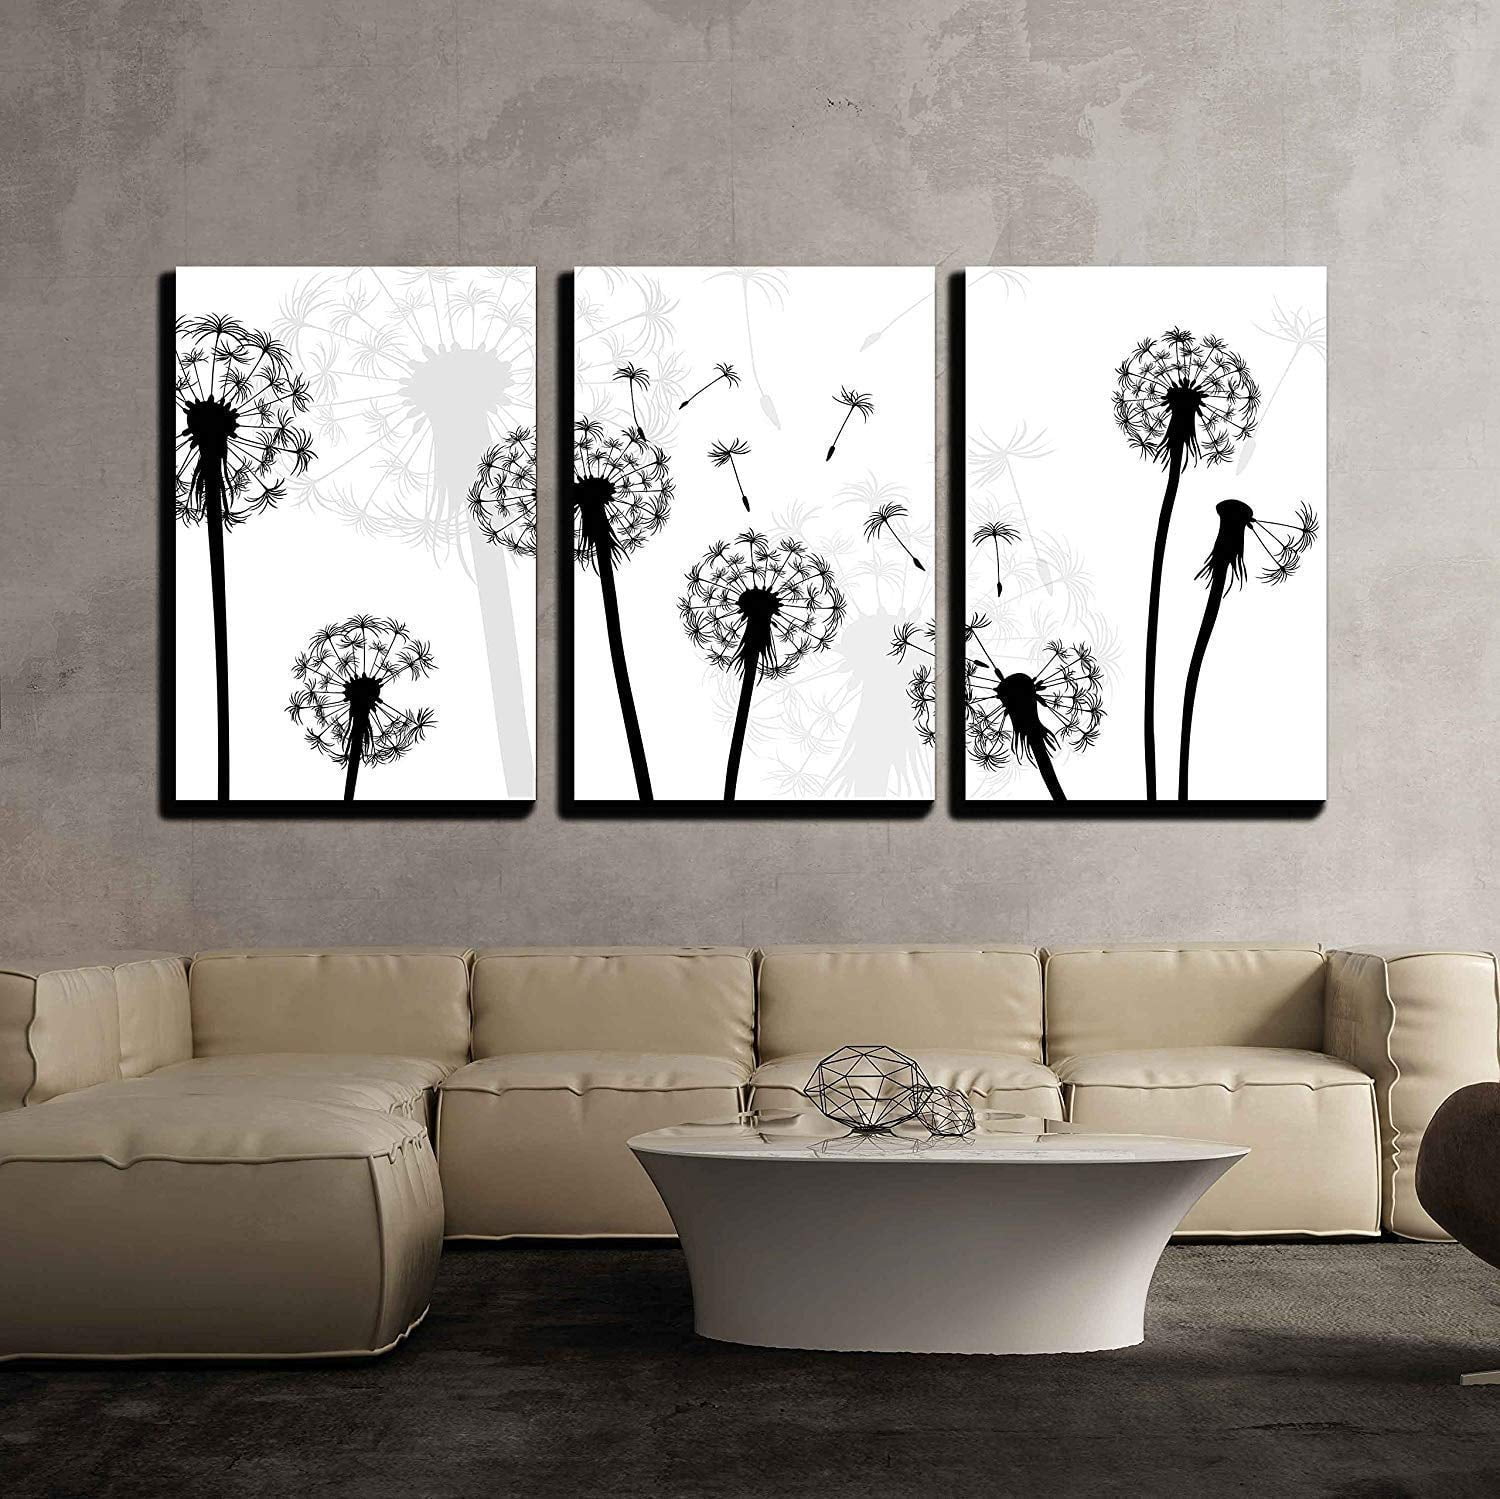 wall26 3 Piece Canvas Wall Art - Black and White Style Dandelion